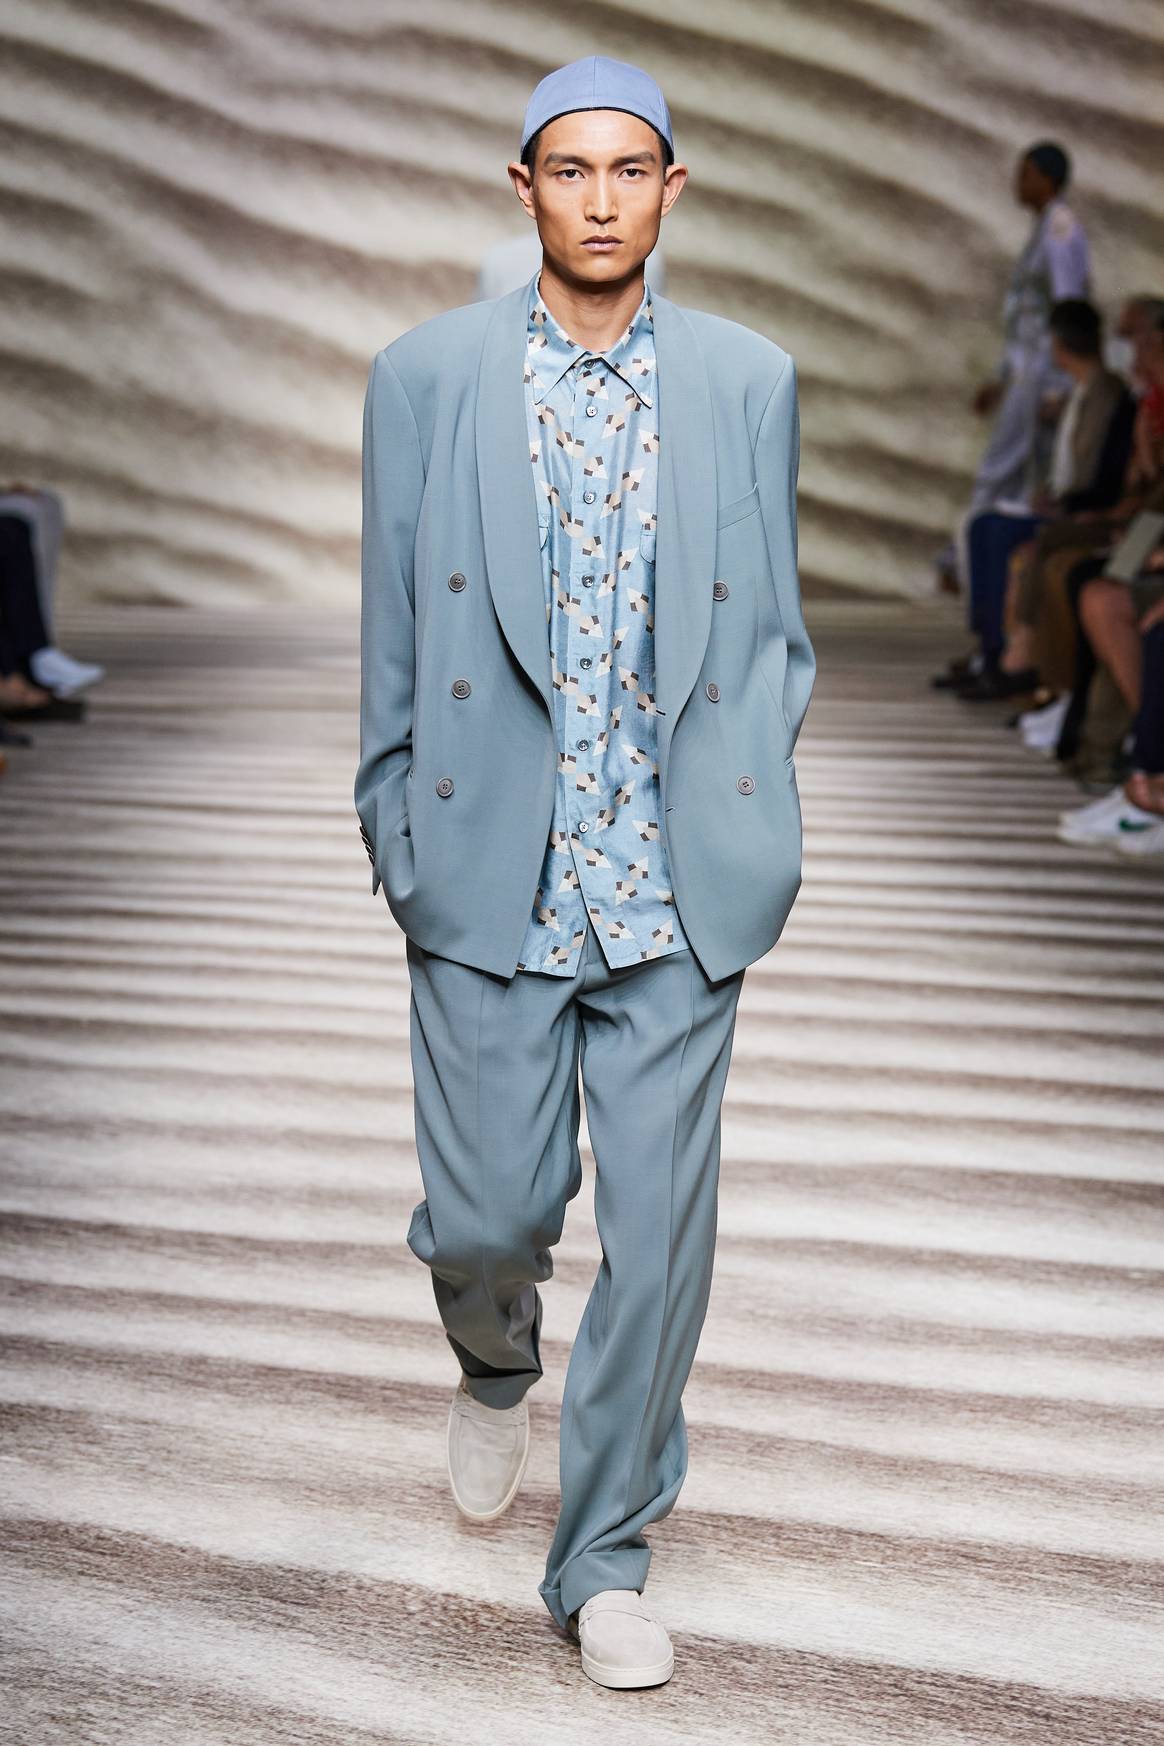 Louis Vuitton spring 2021 menswear is classic men's tailoring with